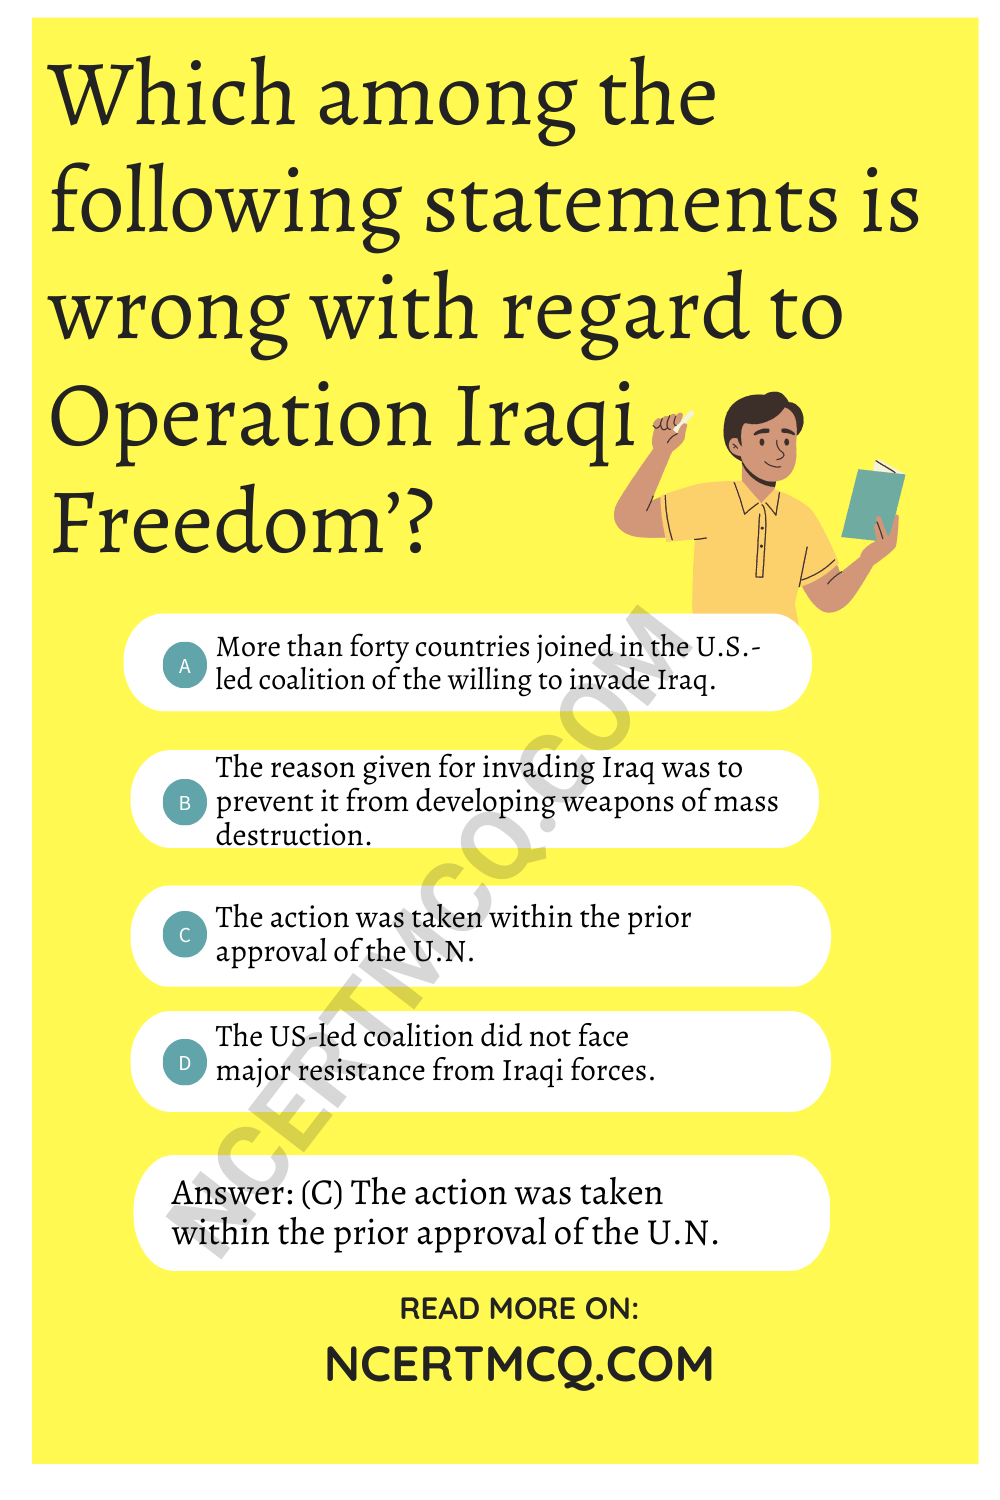 Which among the following statements is wrong with regard to Operation Iraqi Freedom’?